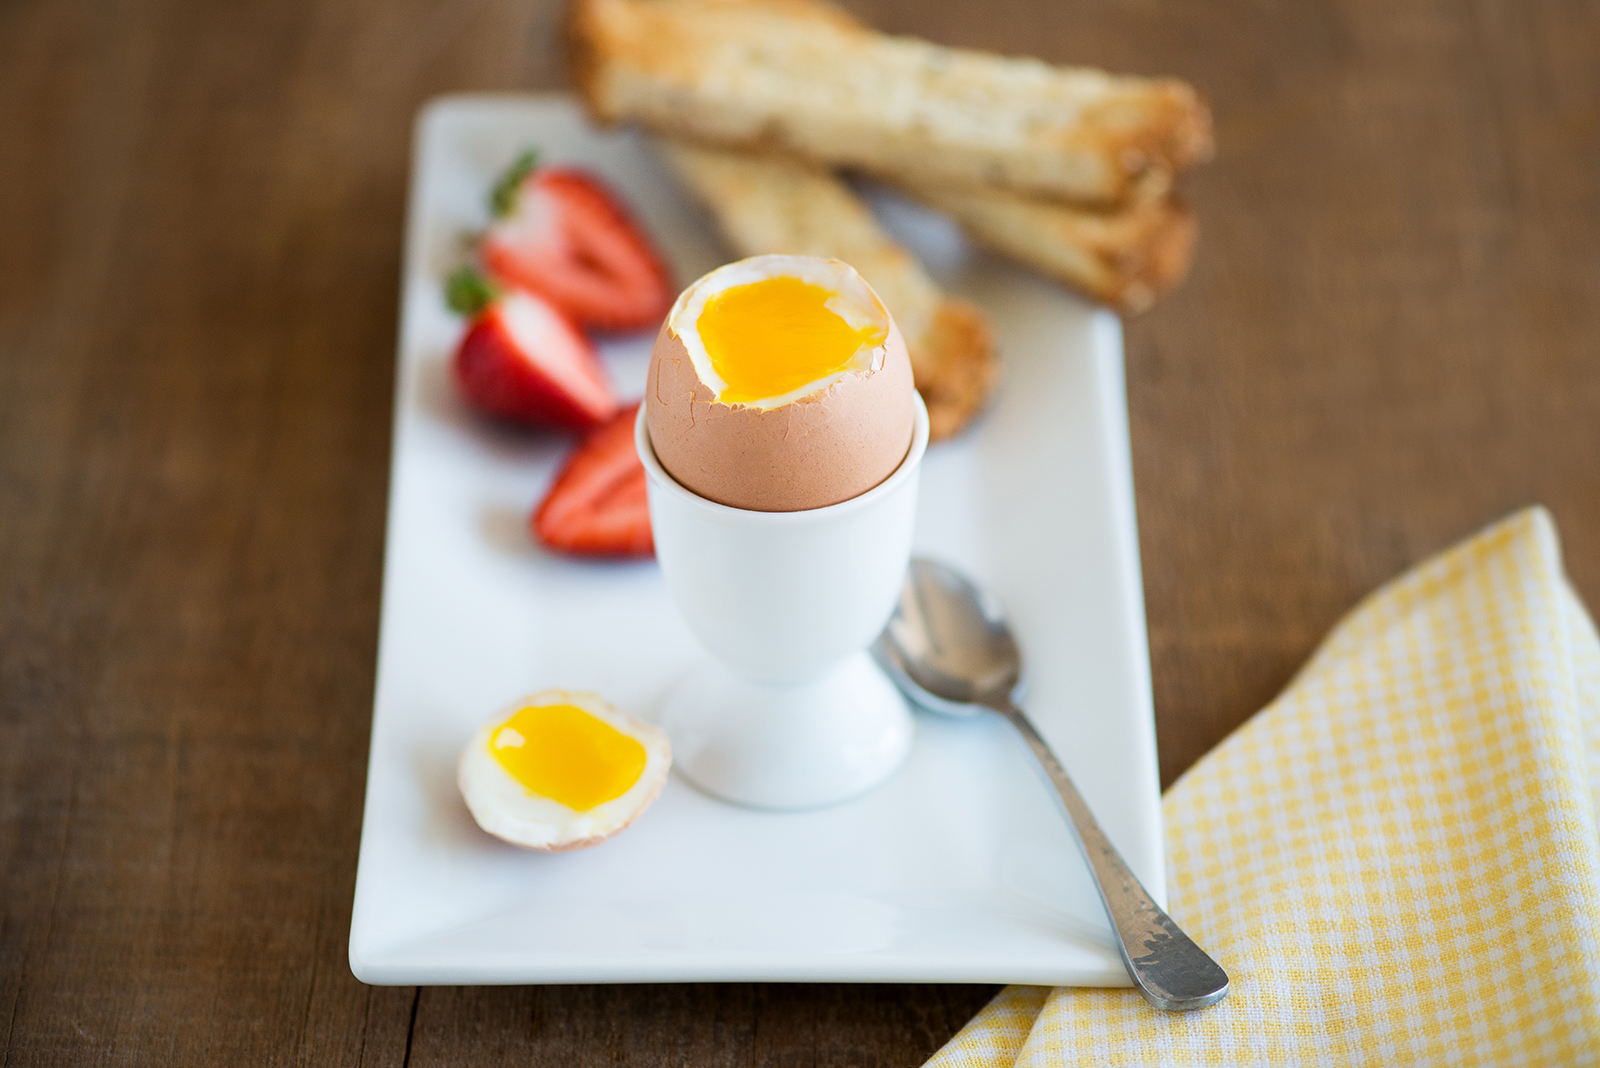 Eat Eggs In Style! 5 Soft-Boiled Egg Holders To Opt For